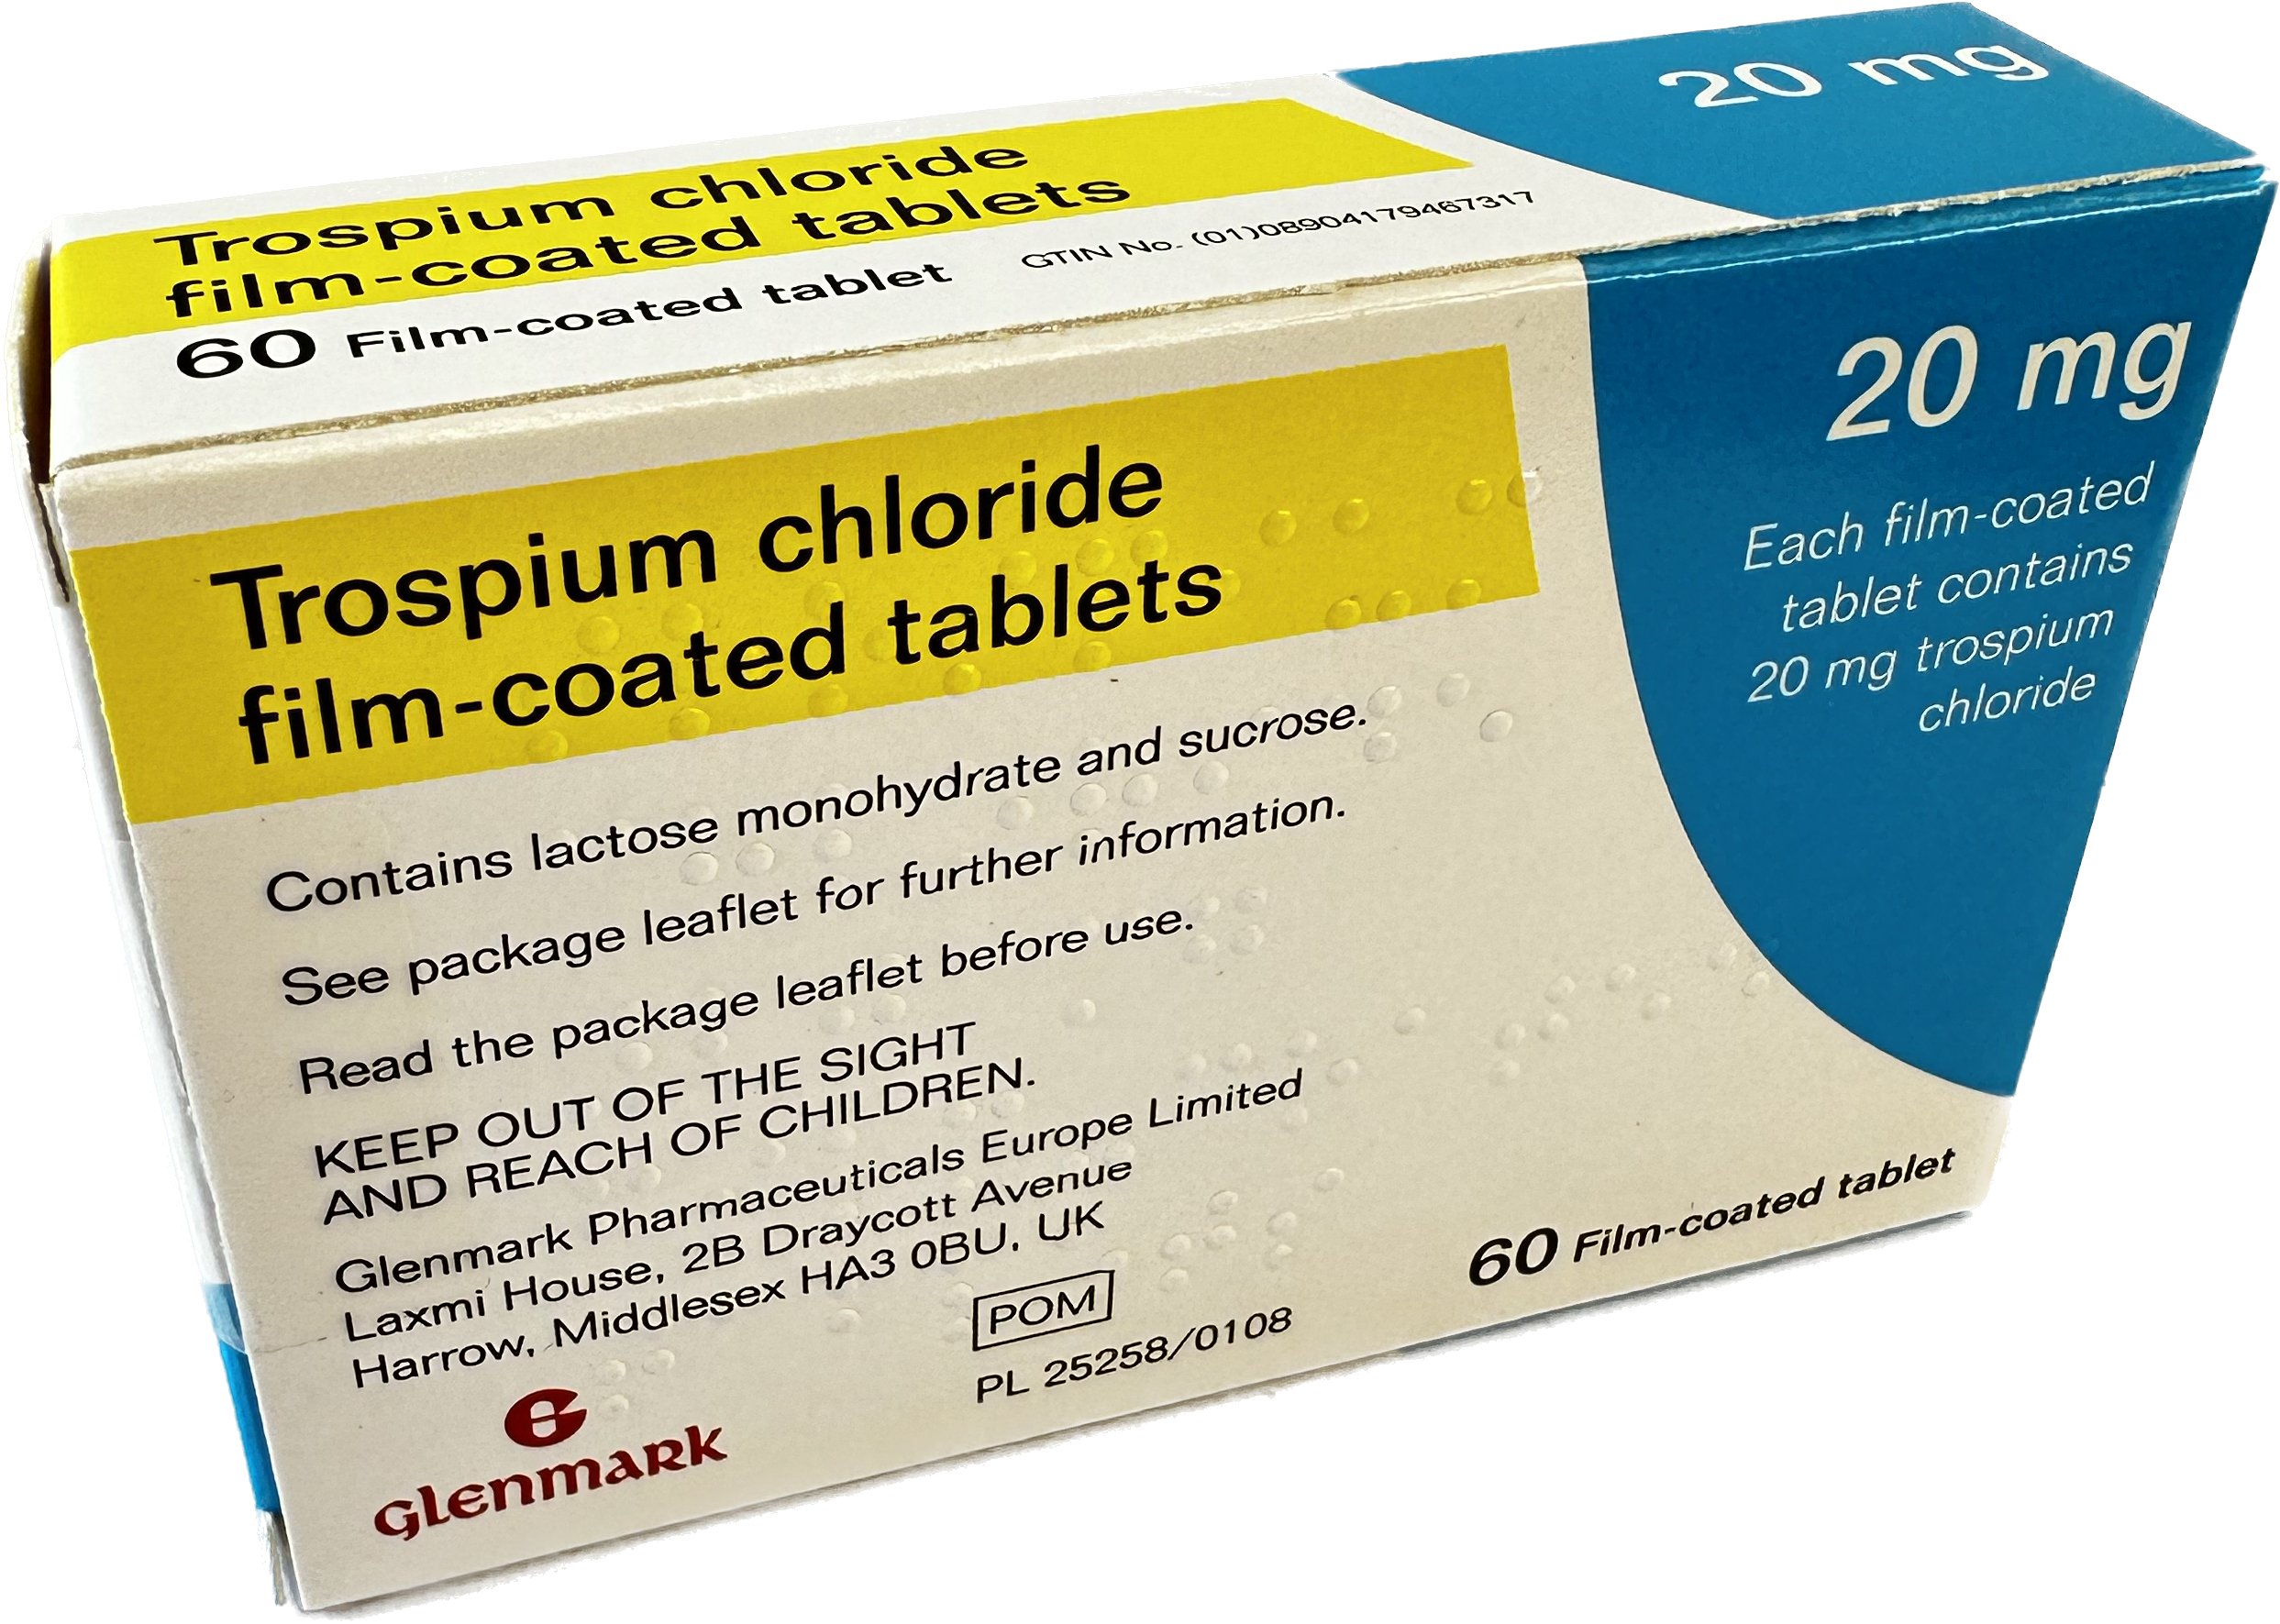 Trospium chloride tablets